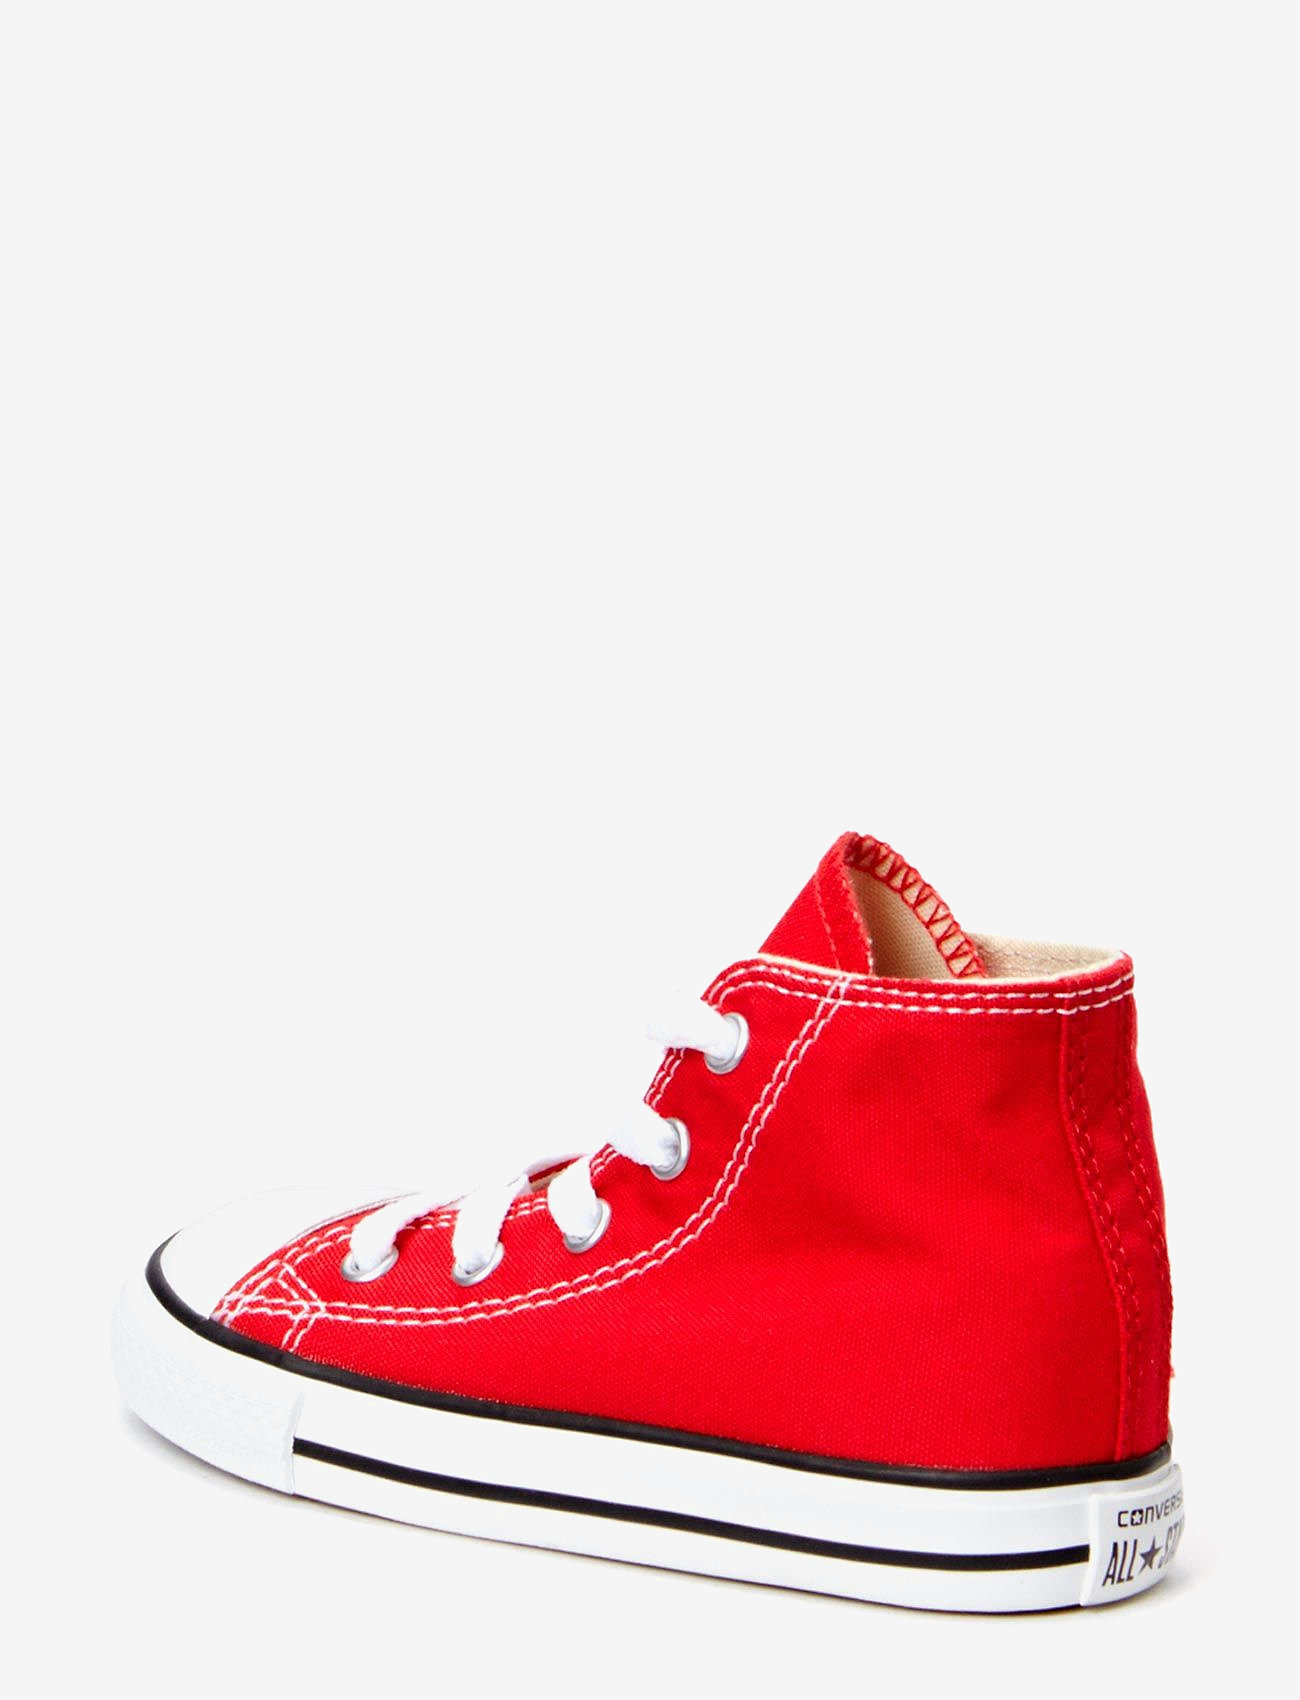 Converse - Chuck Taylor All Star - baskets en toile - red - 1